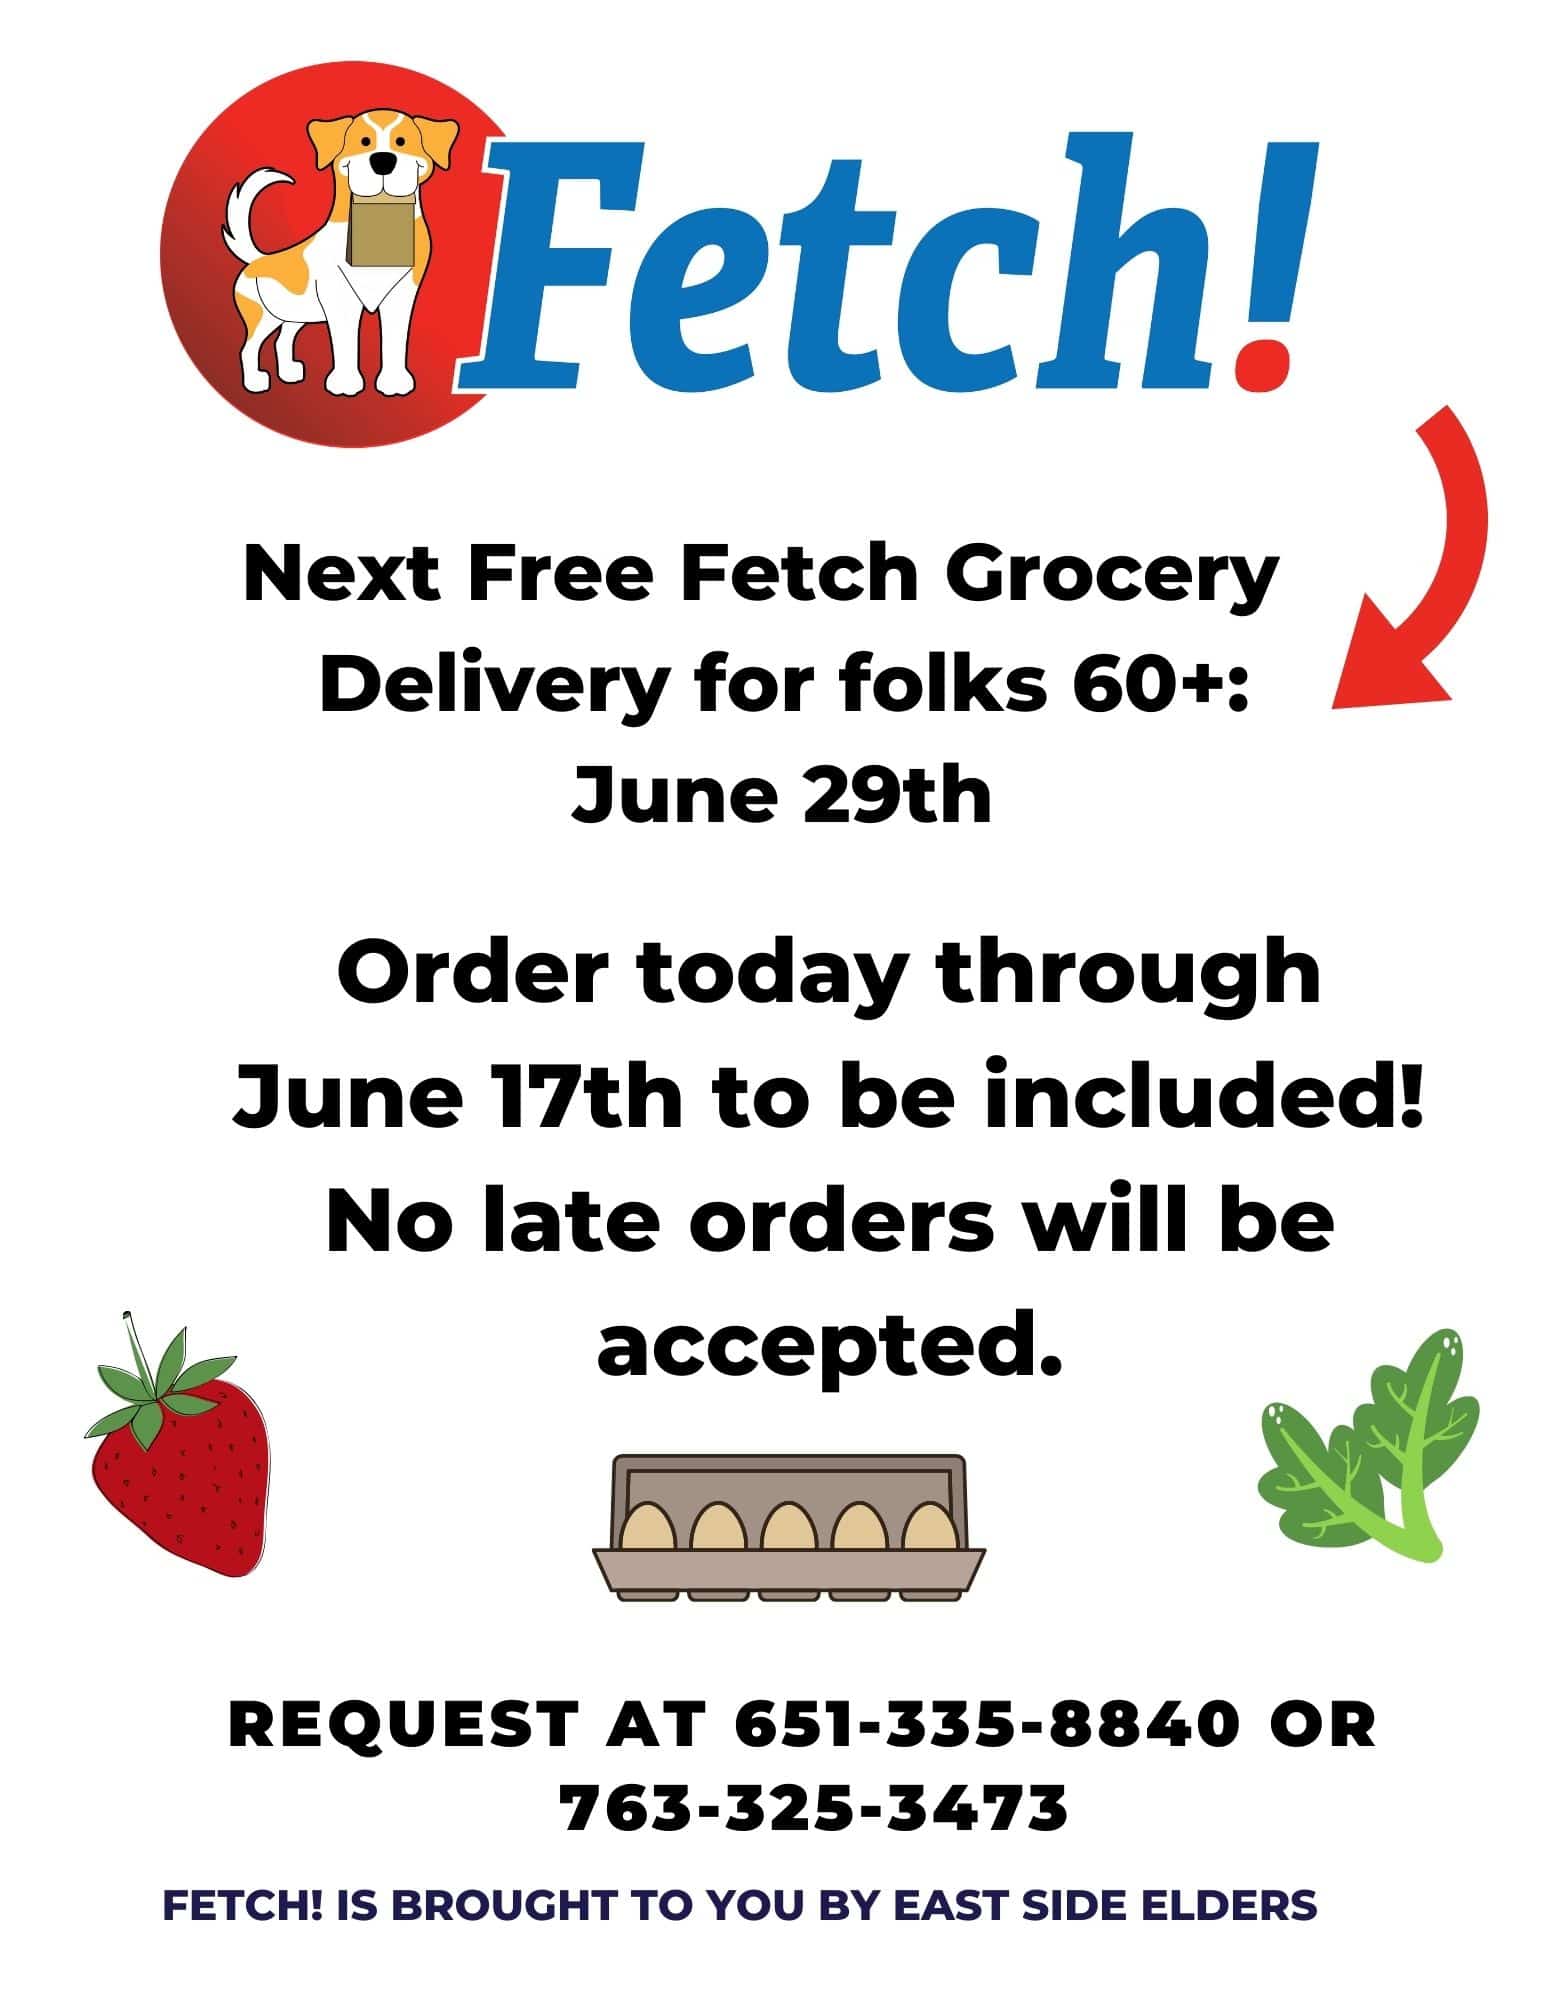 Flier for free groceries for seniors on June 29th. Fetch logo includes a yellow and white dog on a red background, holding a paper bag. For more information about Fetch, call East Side Elders at 763-325-3473.  Flier also includes illustrative images of a strawberry, eggs, and leafy greens. 